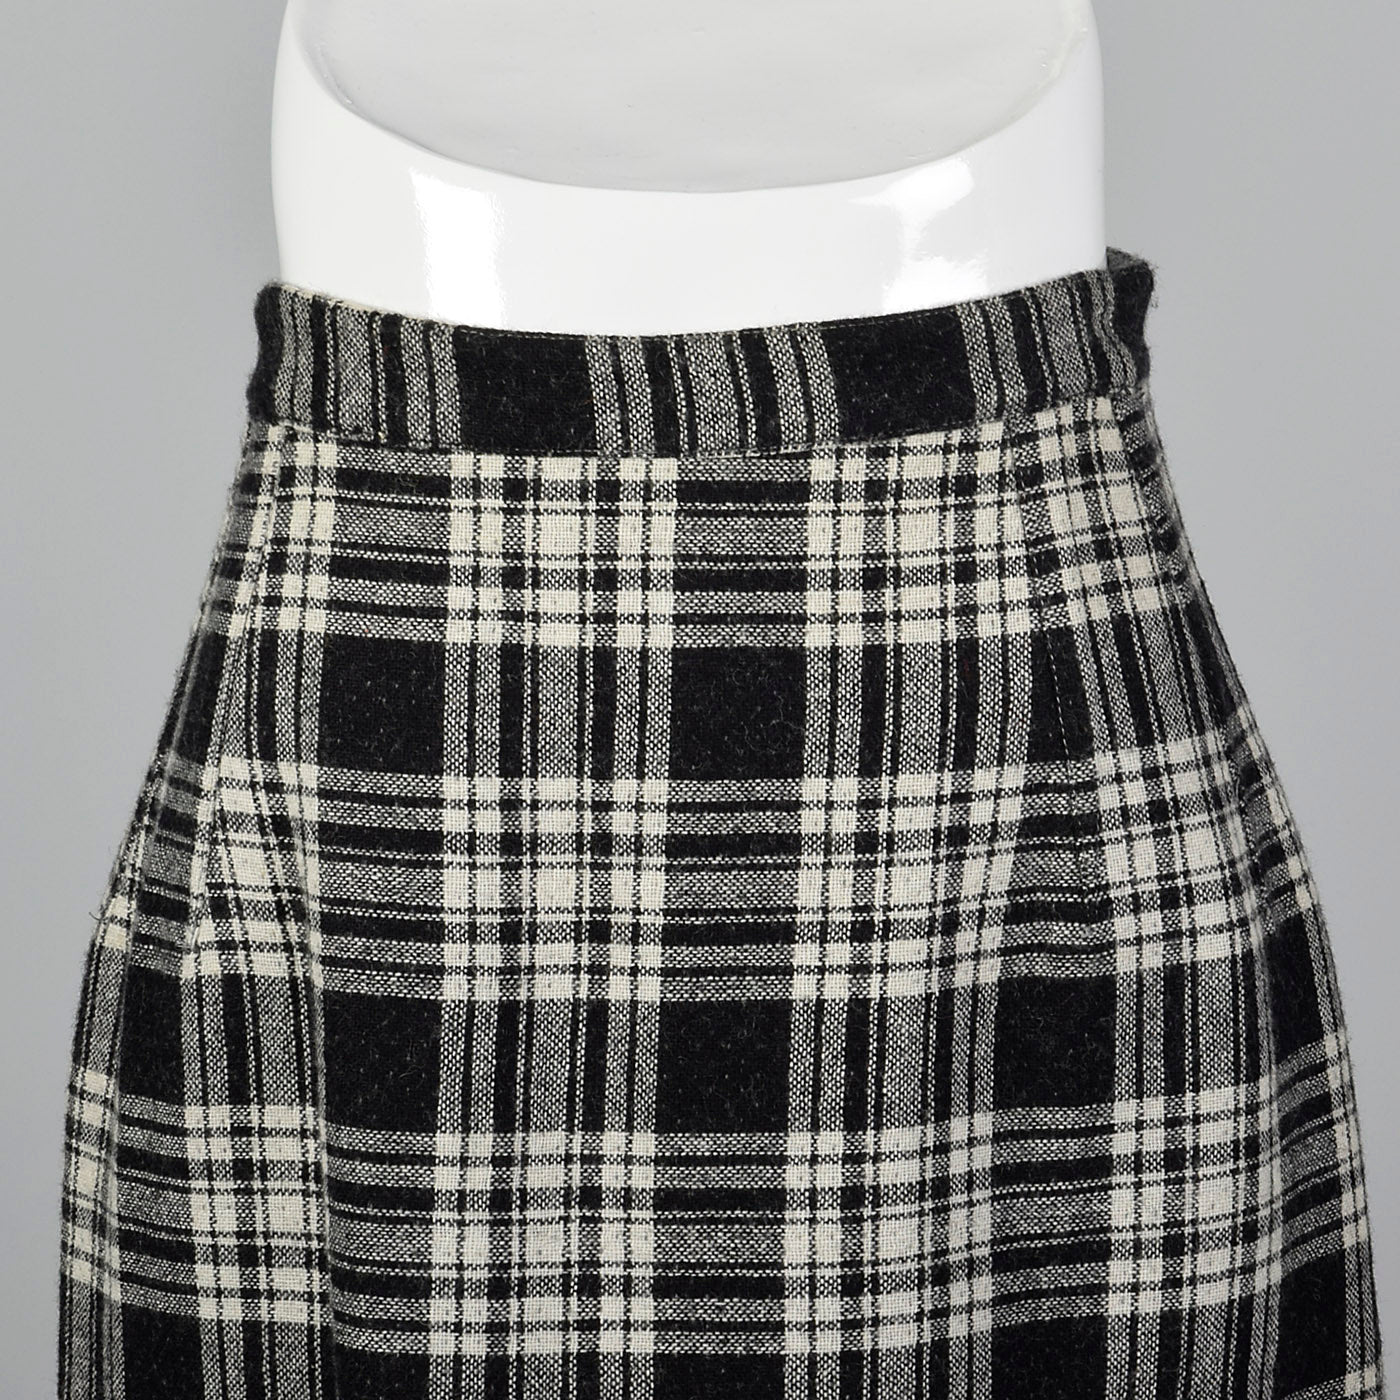 1950s Reversible Pencil Skirt in Gray and Black Plaid